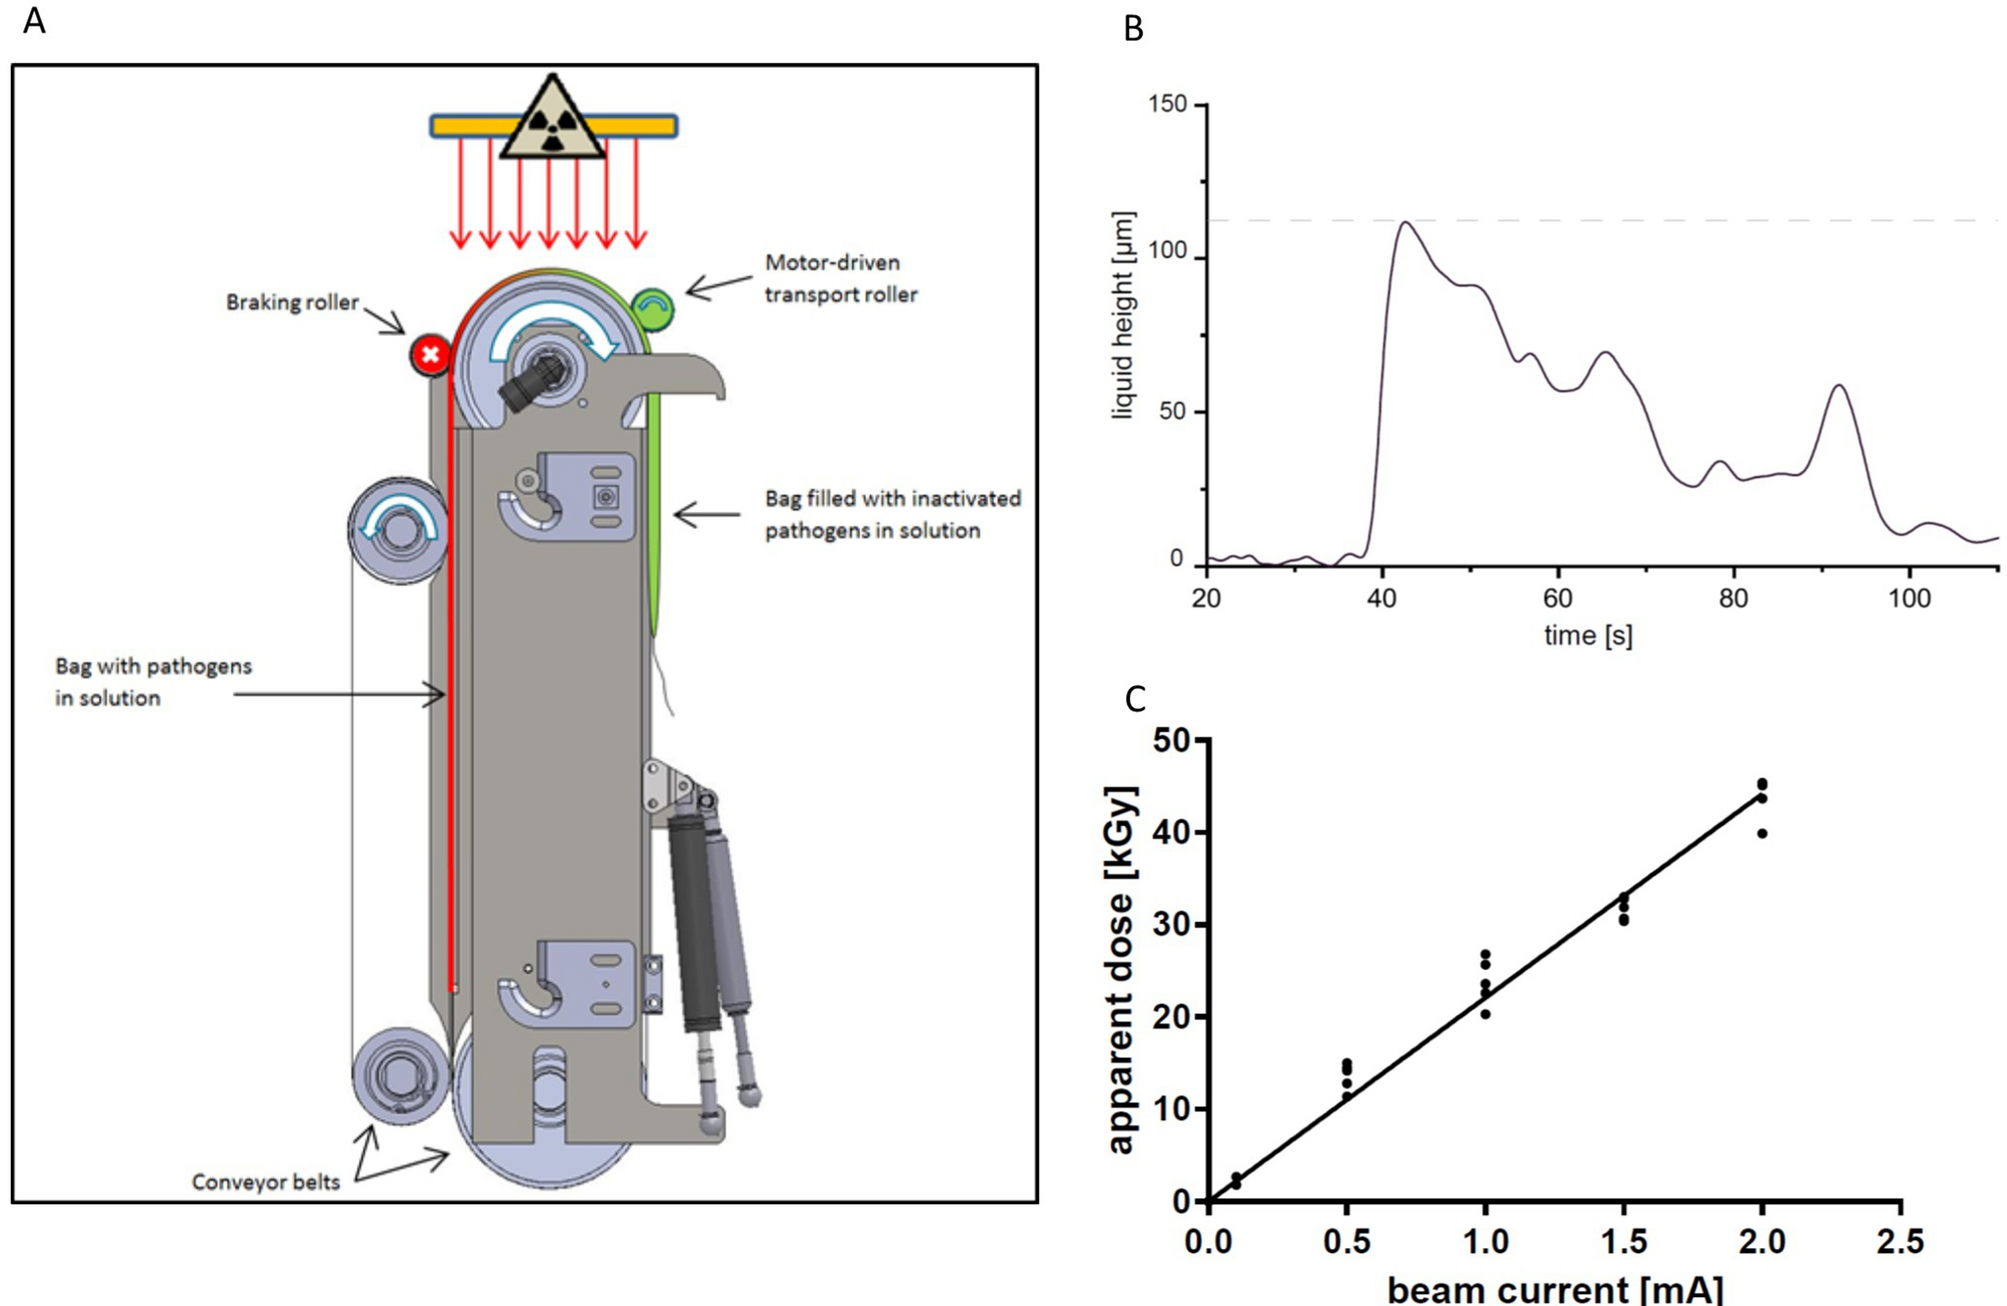 suspendere Ekstraordinær Trickle Automated application of low energy electron irradiation enables  inactivation of pathogen- and cell-containing liquids in biomedical  research and production facilities | Scientific Reports